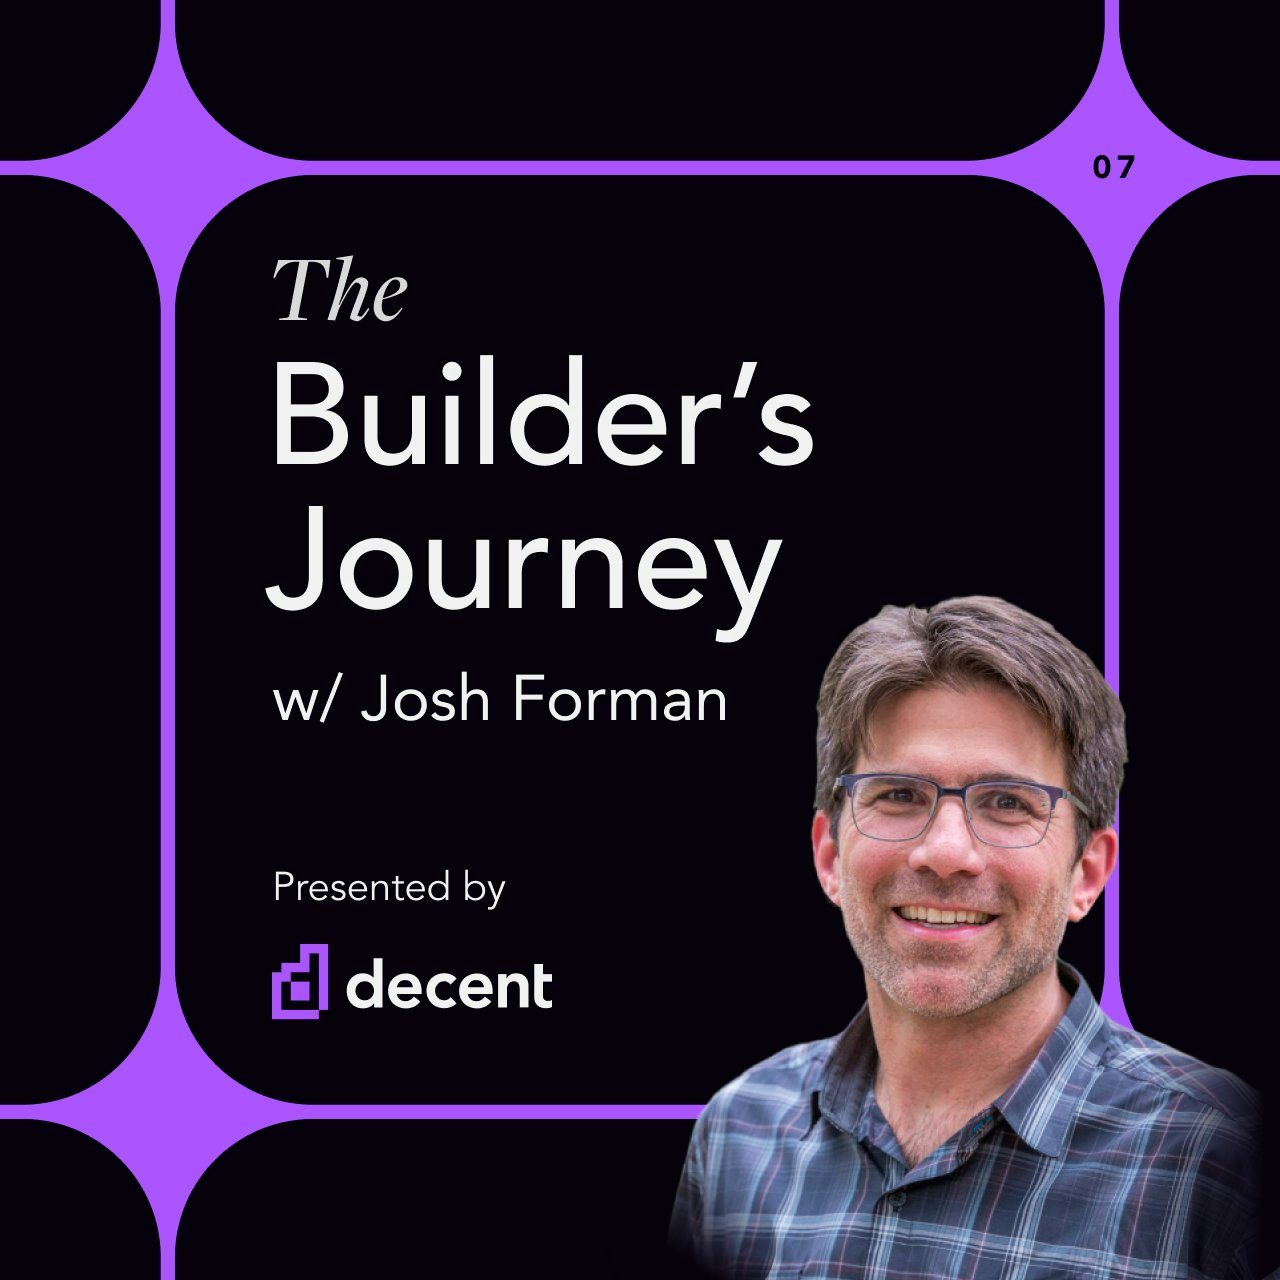 On this episode of the Builder's Journey, we chatted with Josh Forman, leadership coach and ex-engineering lead at Shapeshift. You can find Josh at leadershipcoach.io to build your team and grow yourself. Josh discusses his journey of growing and leading as an engineer, the successful qualities of an engineer, and tips on maintaining mental health for engineers building in tough moments.